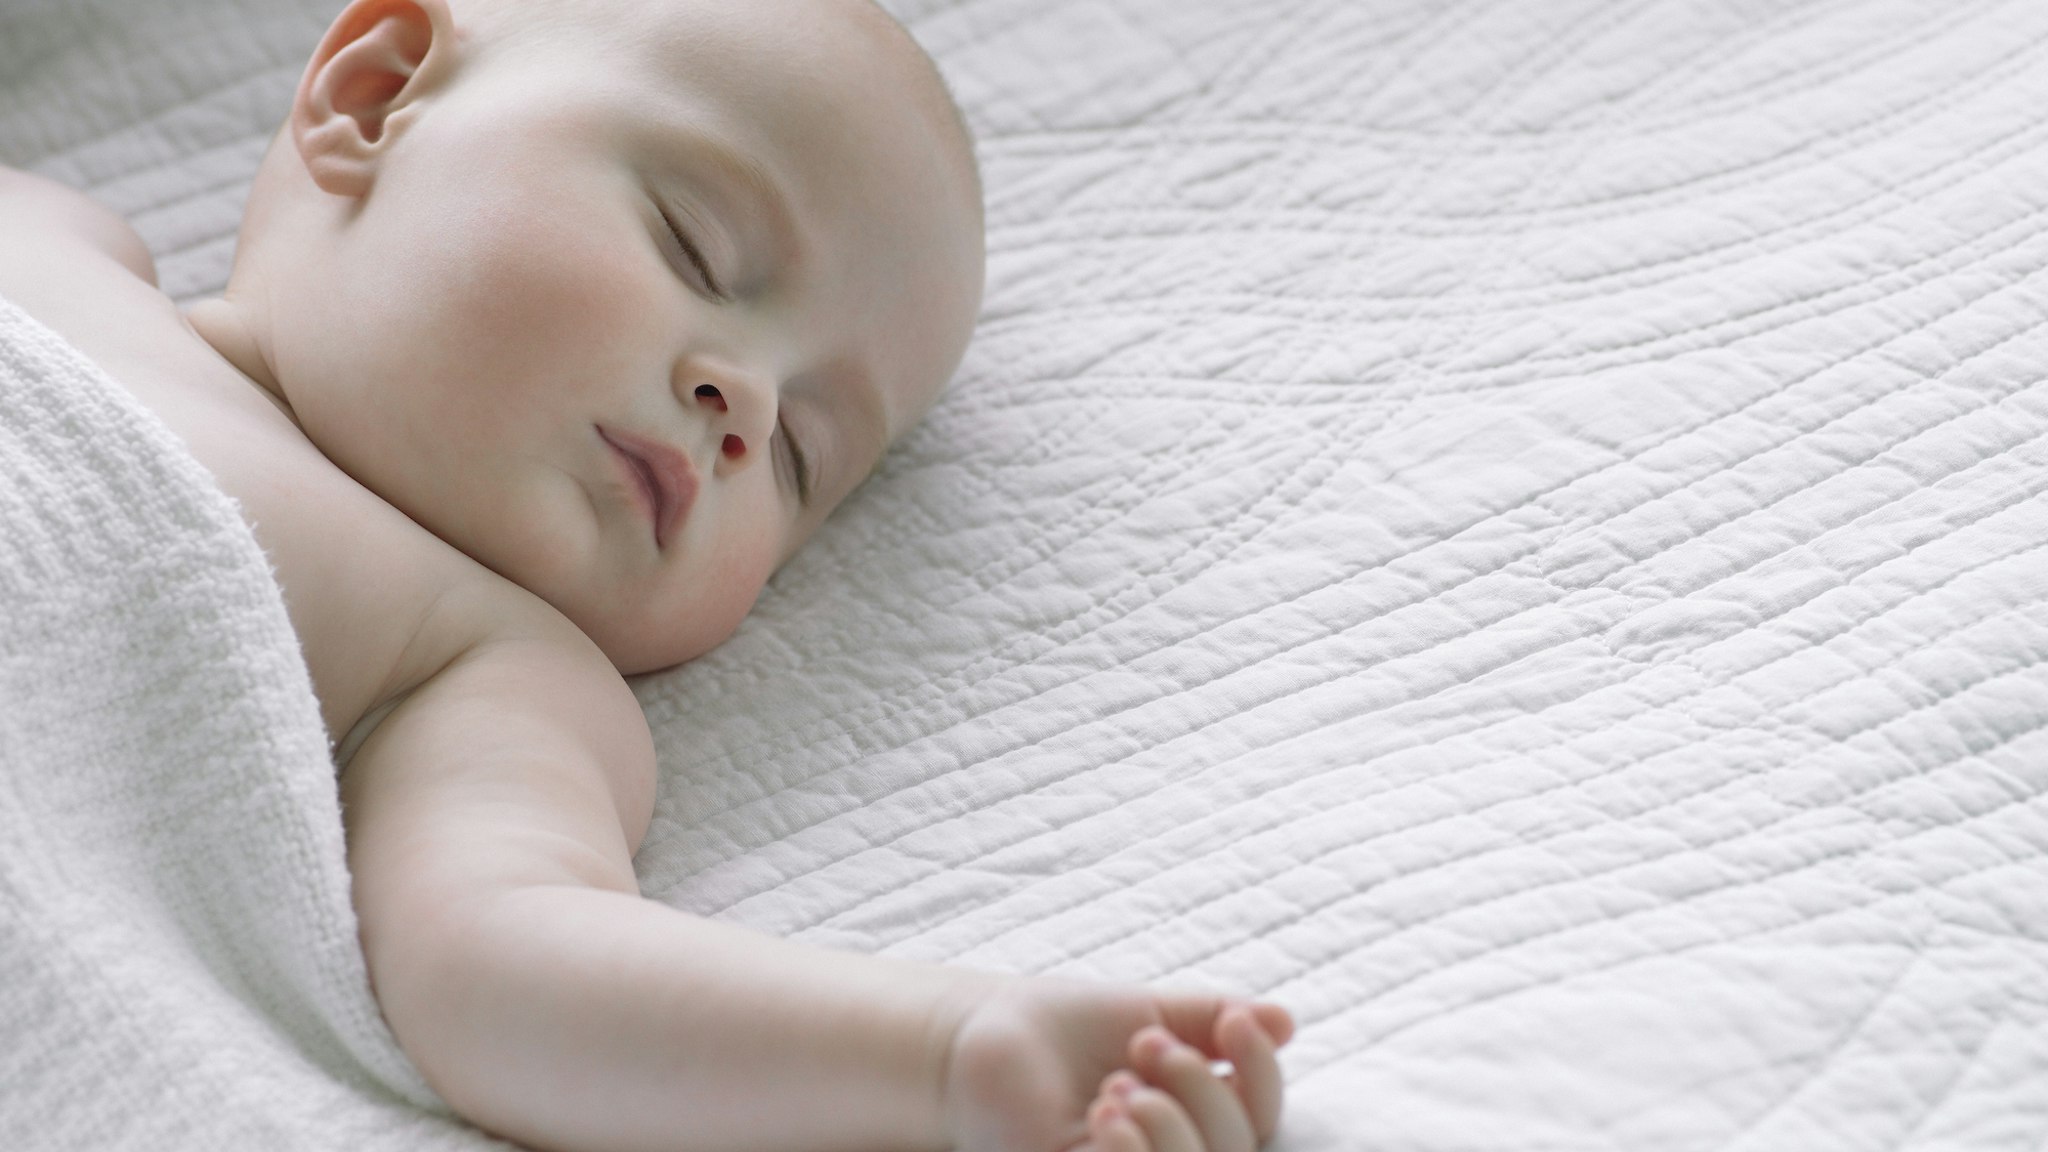 Baby girl (6-9 months) sleeping under blanket, close-up - stock photo